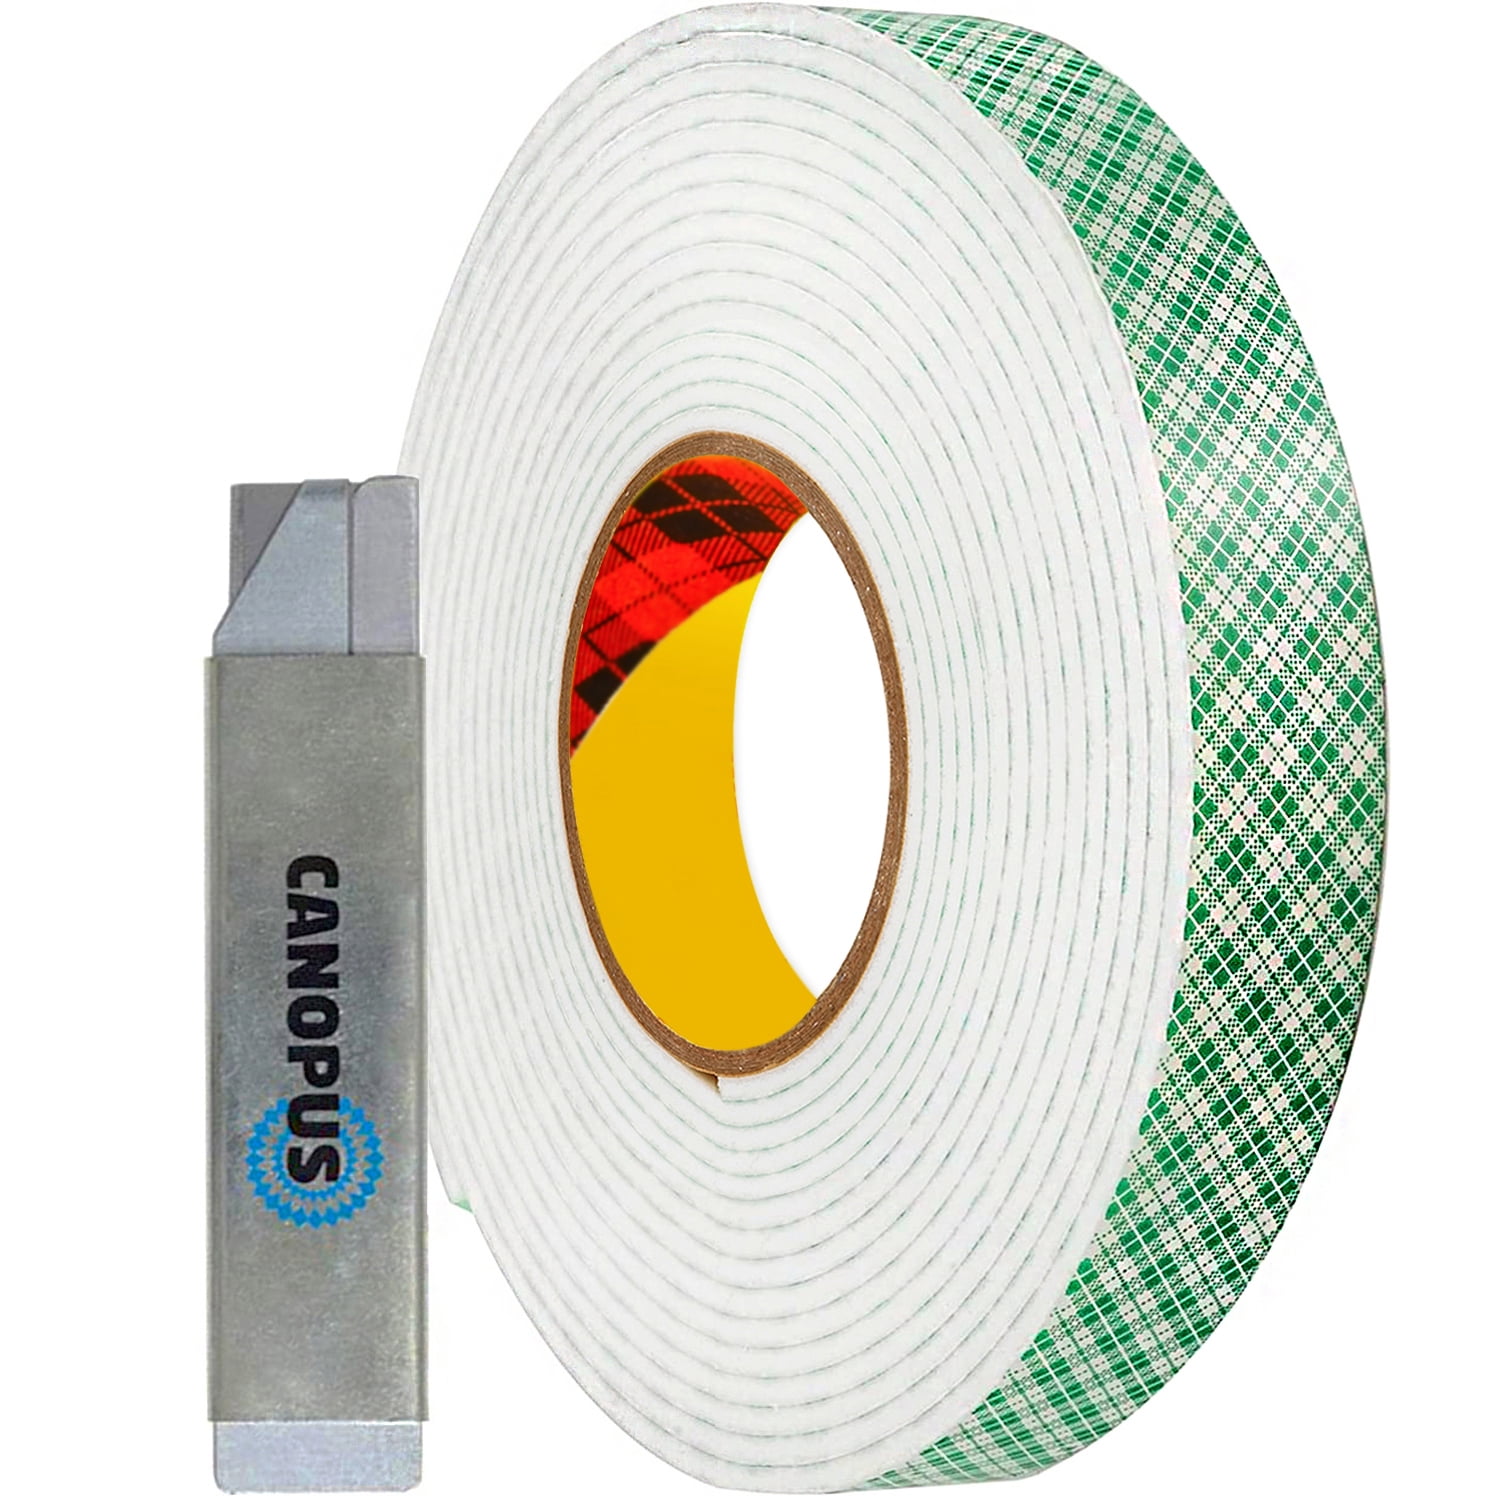 canopus double sided carpet tape for area rugs: non slip rug tape